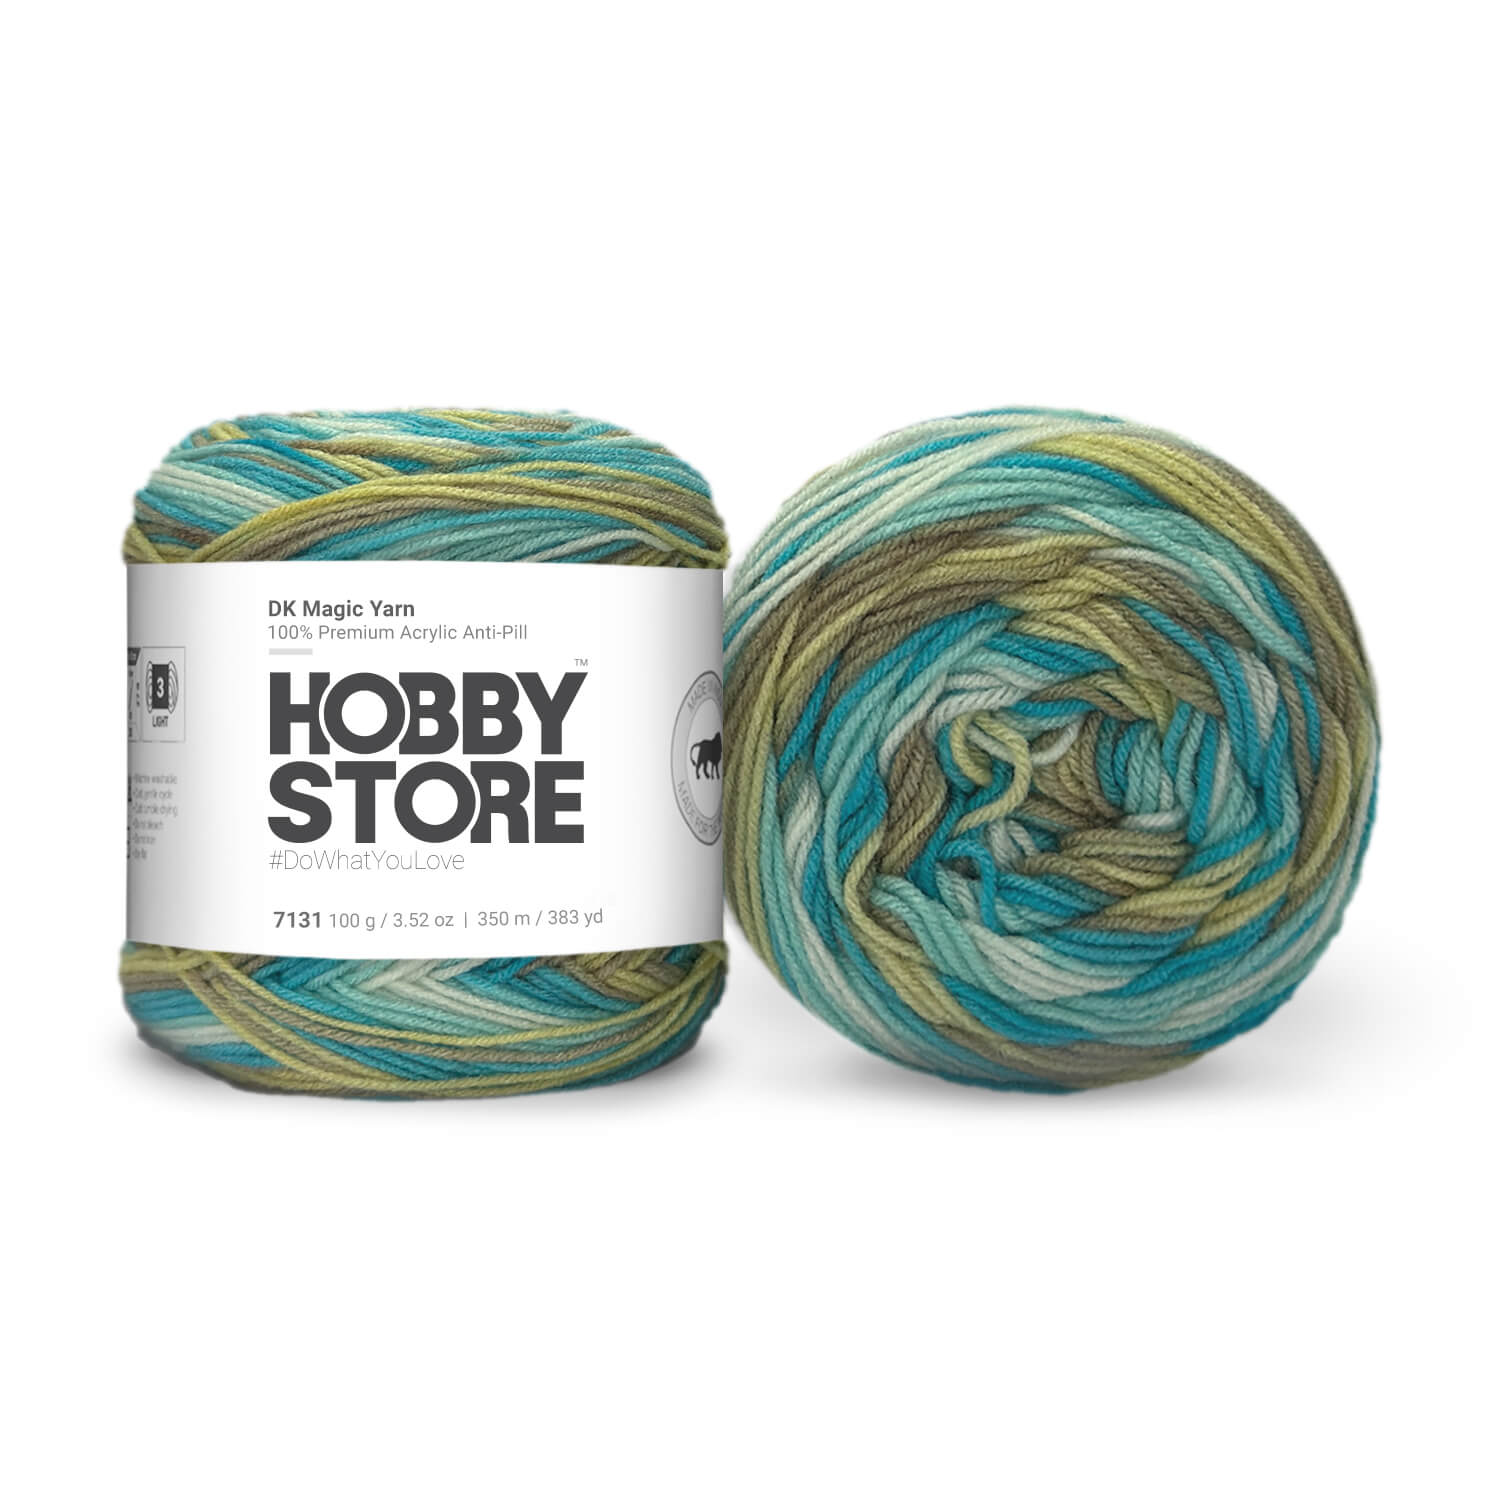 What should I crochet with this yarn? I only have one cake of it. :  r/crochet